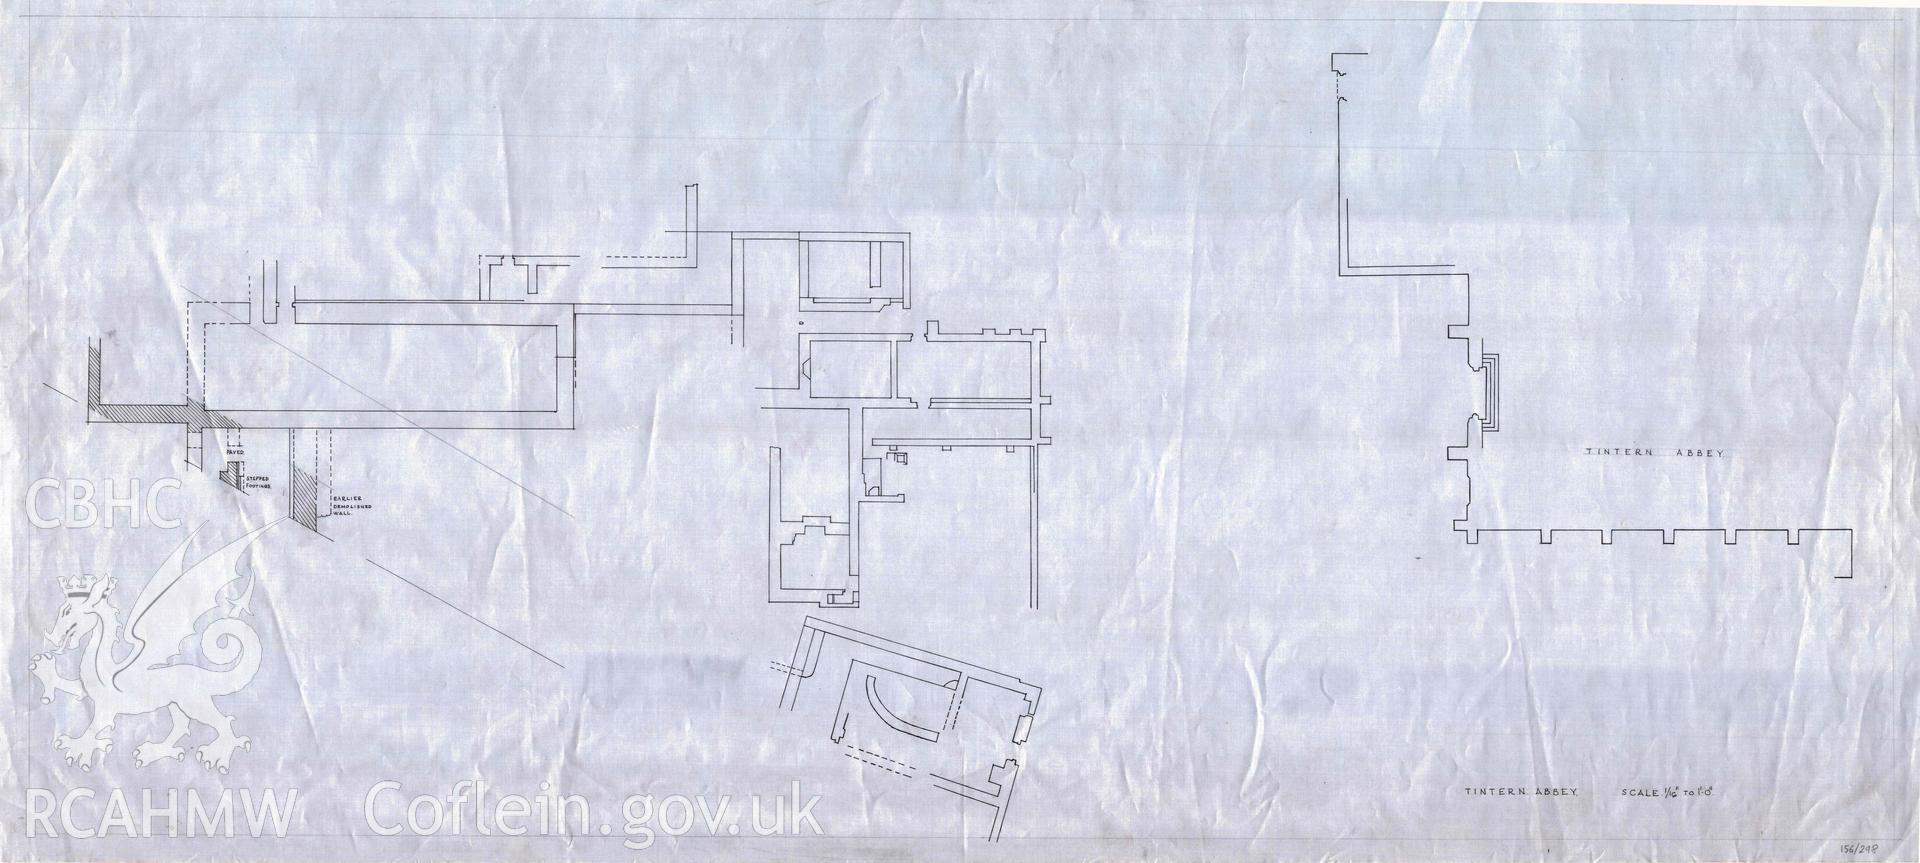 Cadw guardianship monument drawing,  plan of buildings opposite west entrance of the church, Tintern Abbey.